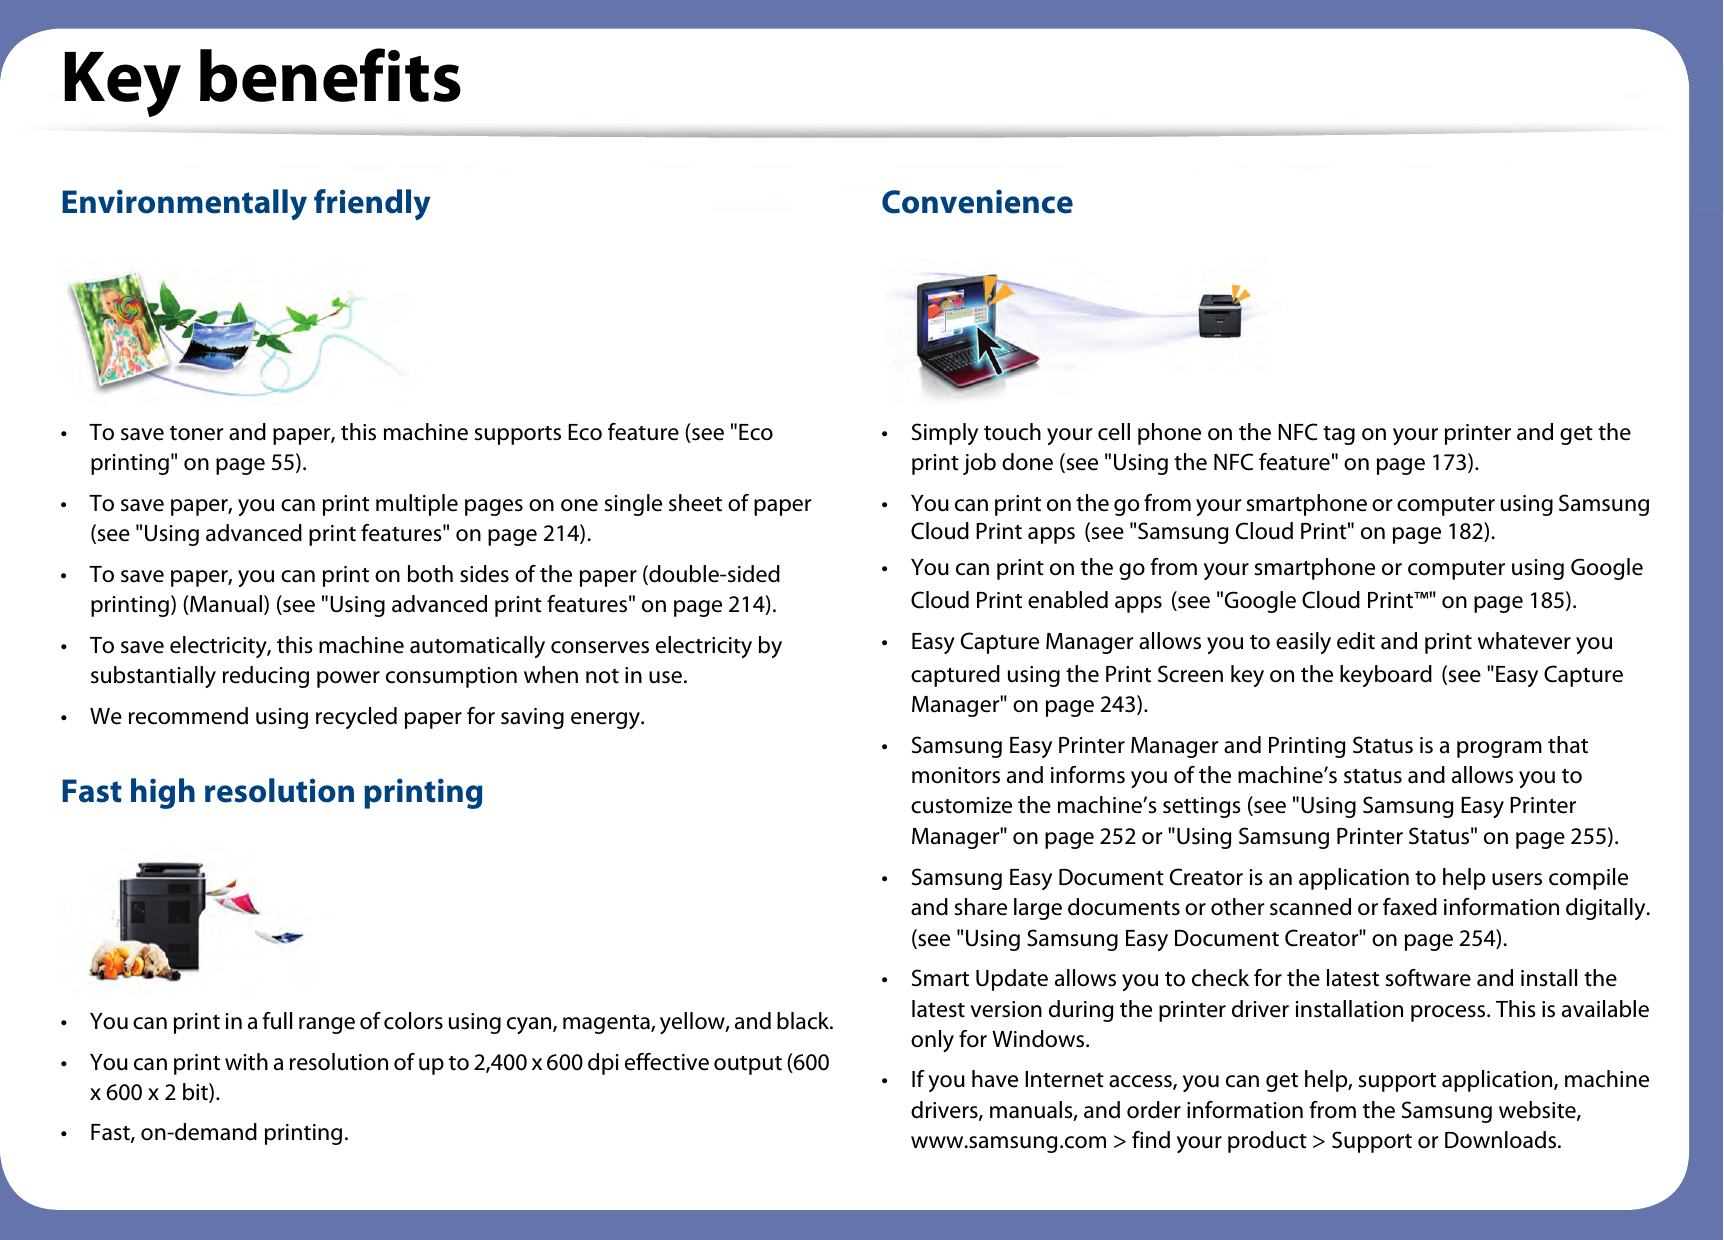 Key benefitsEnvironmentally friendly• To save toner and paper, this machine supports Eco feature (see &quot;Eco printing&quot; on page 55).• To save paper, you can print multiple pages on one single sheet of paper (see &quot;Using advanced print features&quot; on page 214).• To save paper, you can print on both sides of the paper (double-sided printing) (Manual) (see &quot;Using advanced print features&quot; on page 214).• To save electricity, this machine automatically conserves electricity by substantially reducing power consumption when not in use.• We recommend using recycled paper for saving energy.Fast high resolution printing• You can print in a full range of colors using cyan, magenta, yellow, and black.• You can print with a resolution of up to 2,400 x 600 dpi effective output (600 x 600 x 2 bit).• Fast, on-demand printing.Convenience• Simply touch your cell phone on the NFC tag on your printer and get the print job done (see &quot;Using the NFC feature&quot; on page 173). • You can print on the go from your smartphone or computer using Samsung Cloud Print apps (see &quot;Samsung Cloud Print&quot; on page 182).• You can print on the go from your smartphone or computer using Google Cloud Print enabled apps (see &quot;Google Cloud Print™&quot; on page 185).• Easy Capture Manager allows you to easily edit and print whatever you captured using the Print Screen key on the keyboard (see &quot;Easy Capture Manager&quot; on page 243).• Samsung Easy Printer Manager and Printing Status is a program that monitors and informs you of the machine’s status and allows you to customize the machine’s settings (see &quot;Using Samsung Easy Printer Manager&quot; on page 252 or &quot;Using Samsung Printer Status&quot; on page 255).• Samsung Easy Document Creator is an application to help users compile and share large documents or other scanned or faxed information digitally. (see &quot;Using Samsung Easy Document Creator&quot; on page 254).• Smart Update allows you to check for the latest software and install the latest version during the printer driver installation process. This is available only for Windows.• If you have Internet access, you can get help, support application, machine drivers, manuals, and order information from the Samsung website, www.samsung.com &gt; find your product &gt; Support or Downloads.